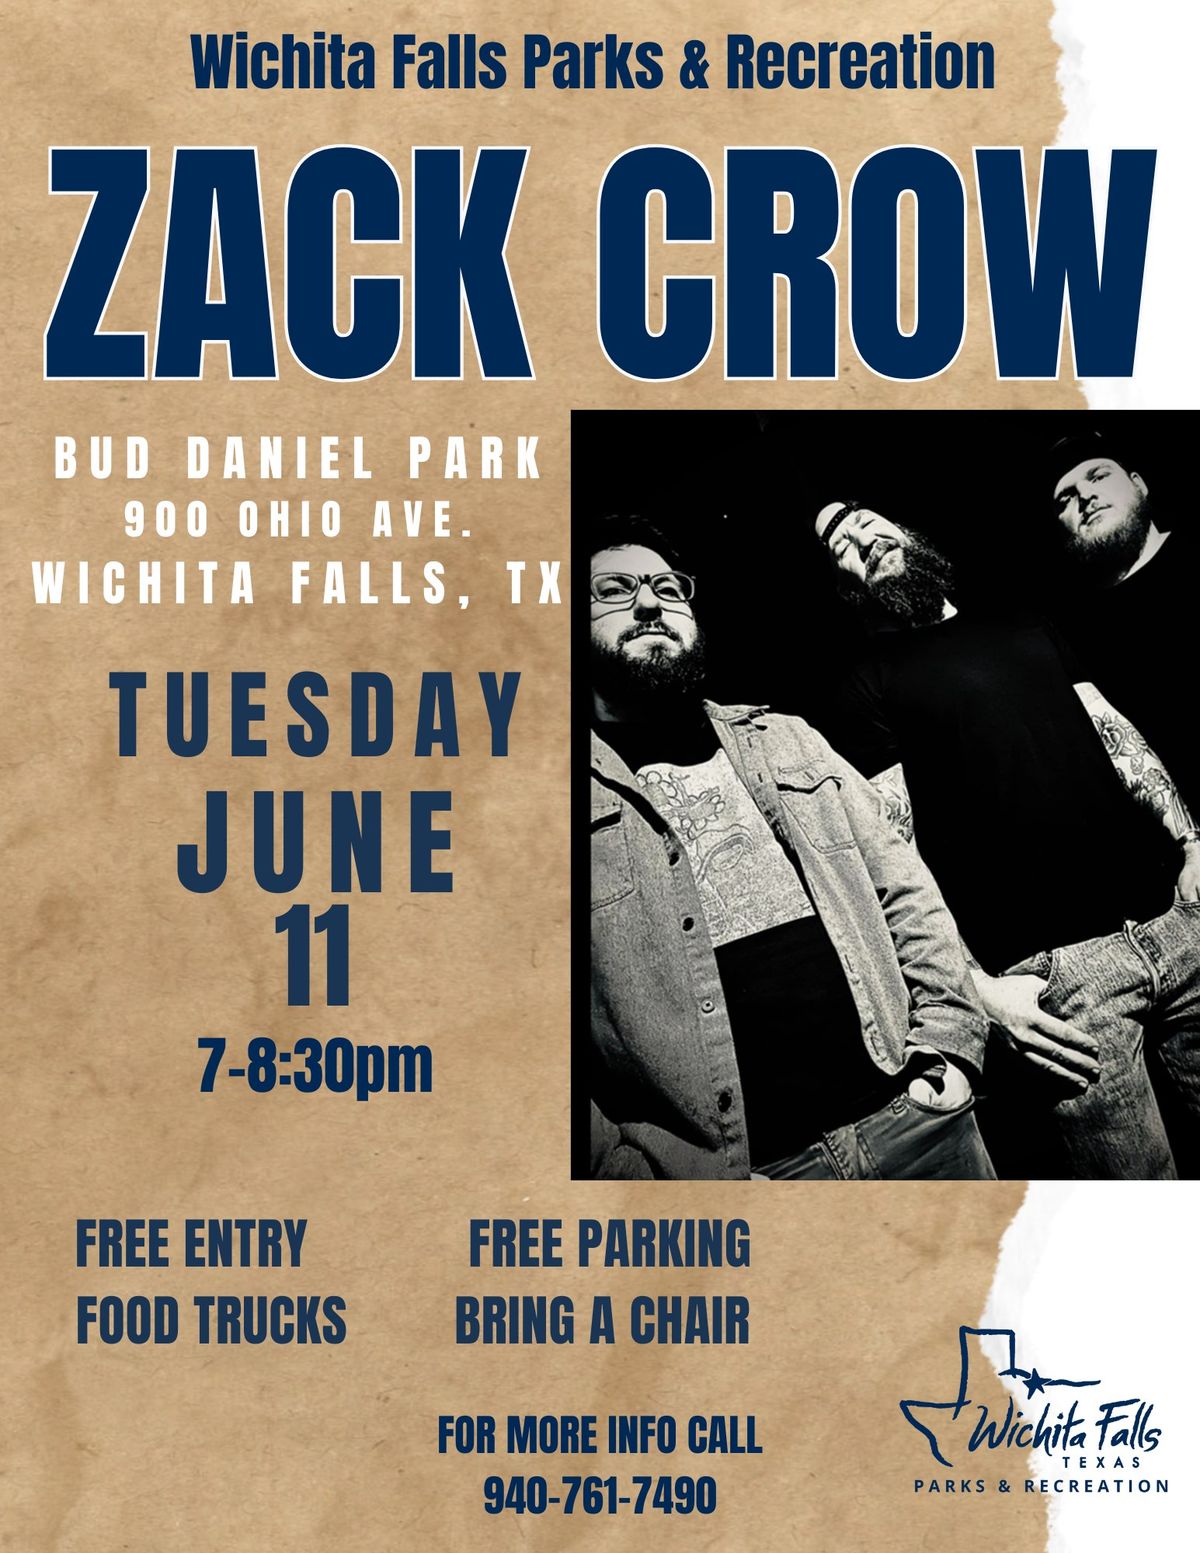 "Zack Crow" Outdoor Concert - City of Wichita Falls Parks & Recreation